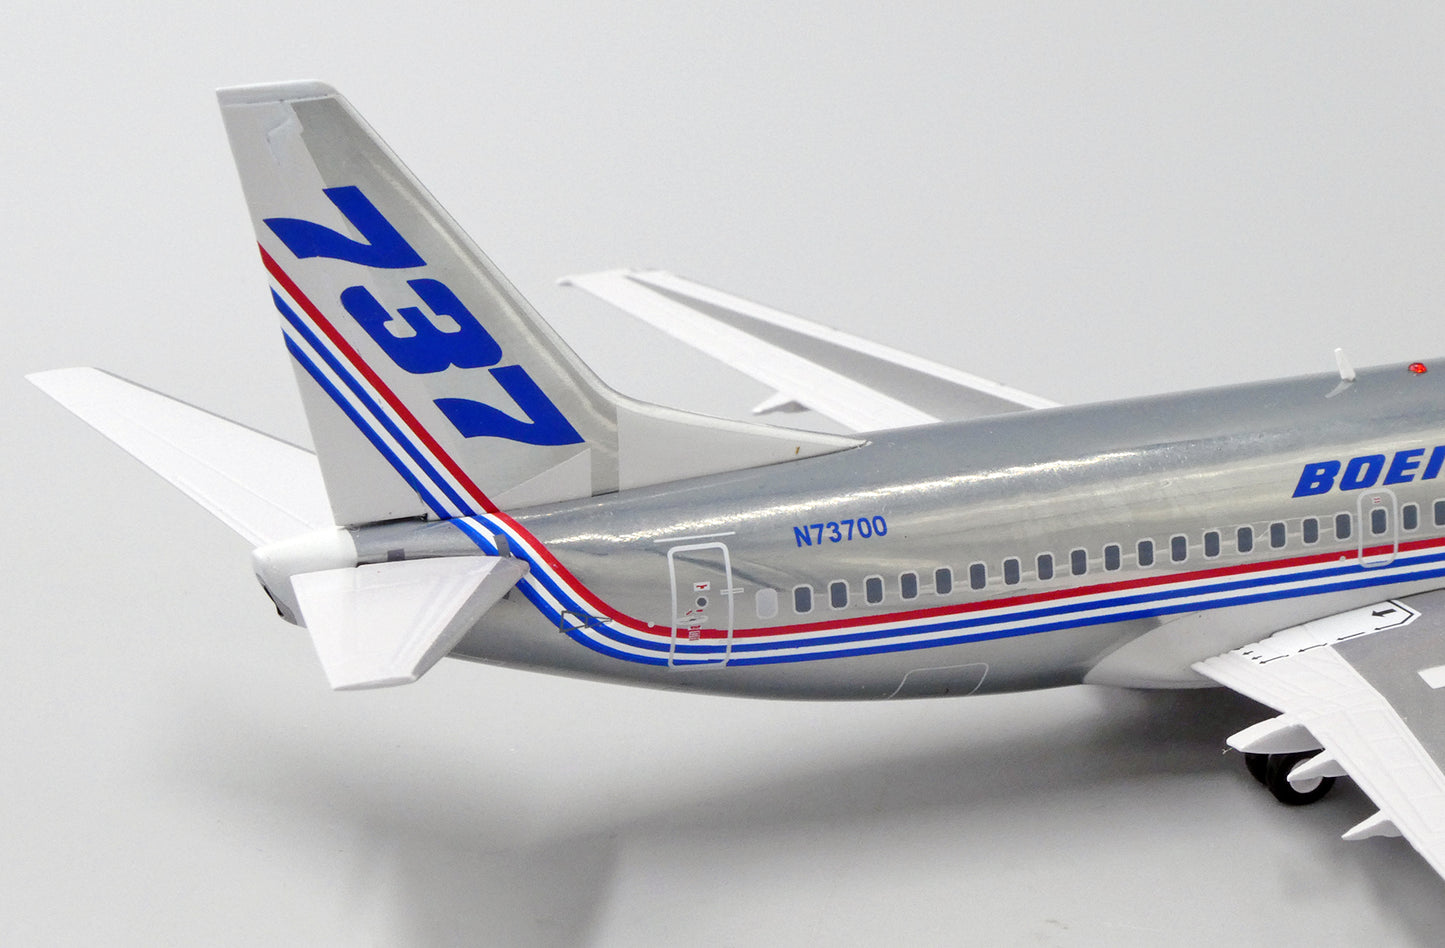 1:200 JC Wings Boeing House Colors 737-500 N73700 LH2231 w/ Stand